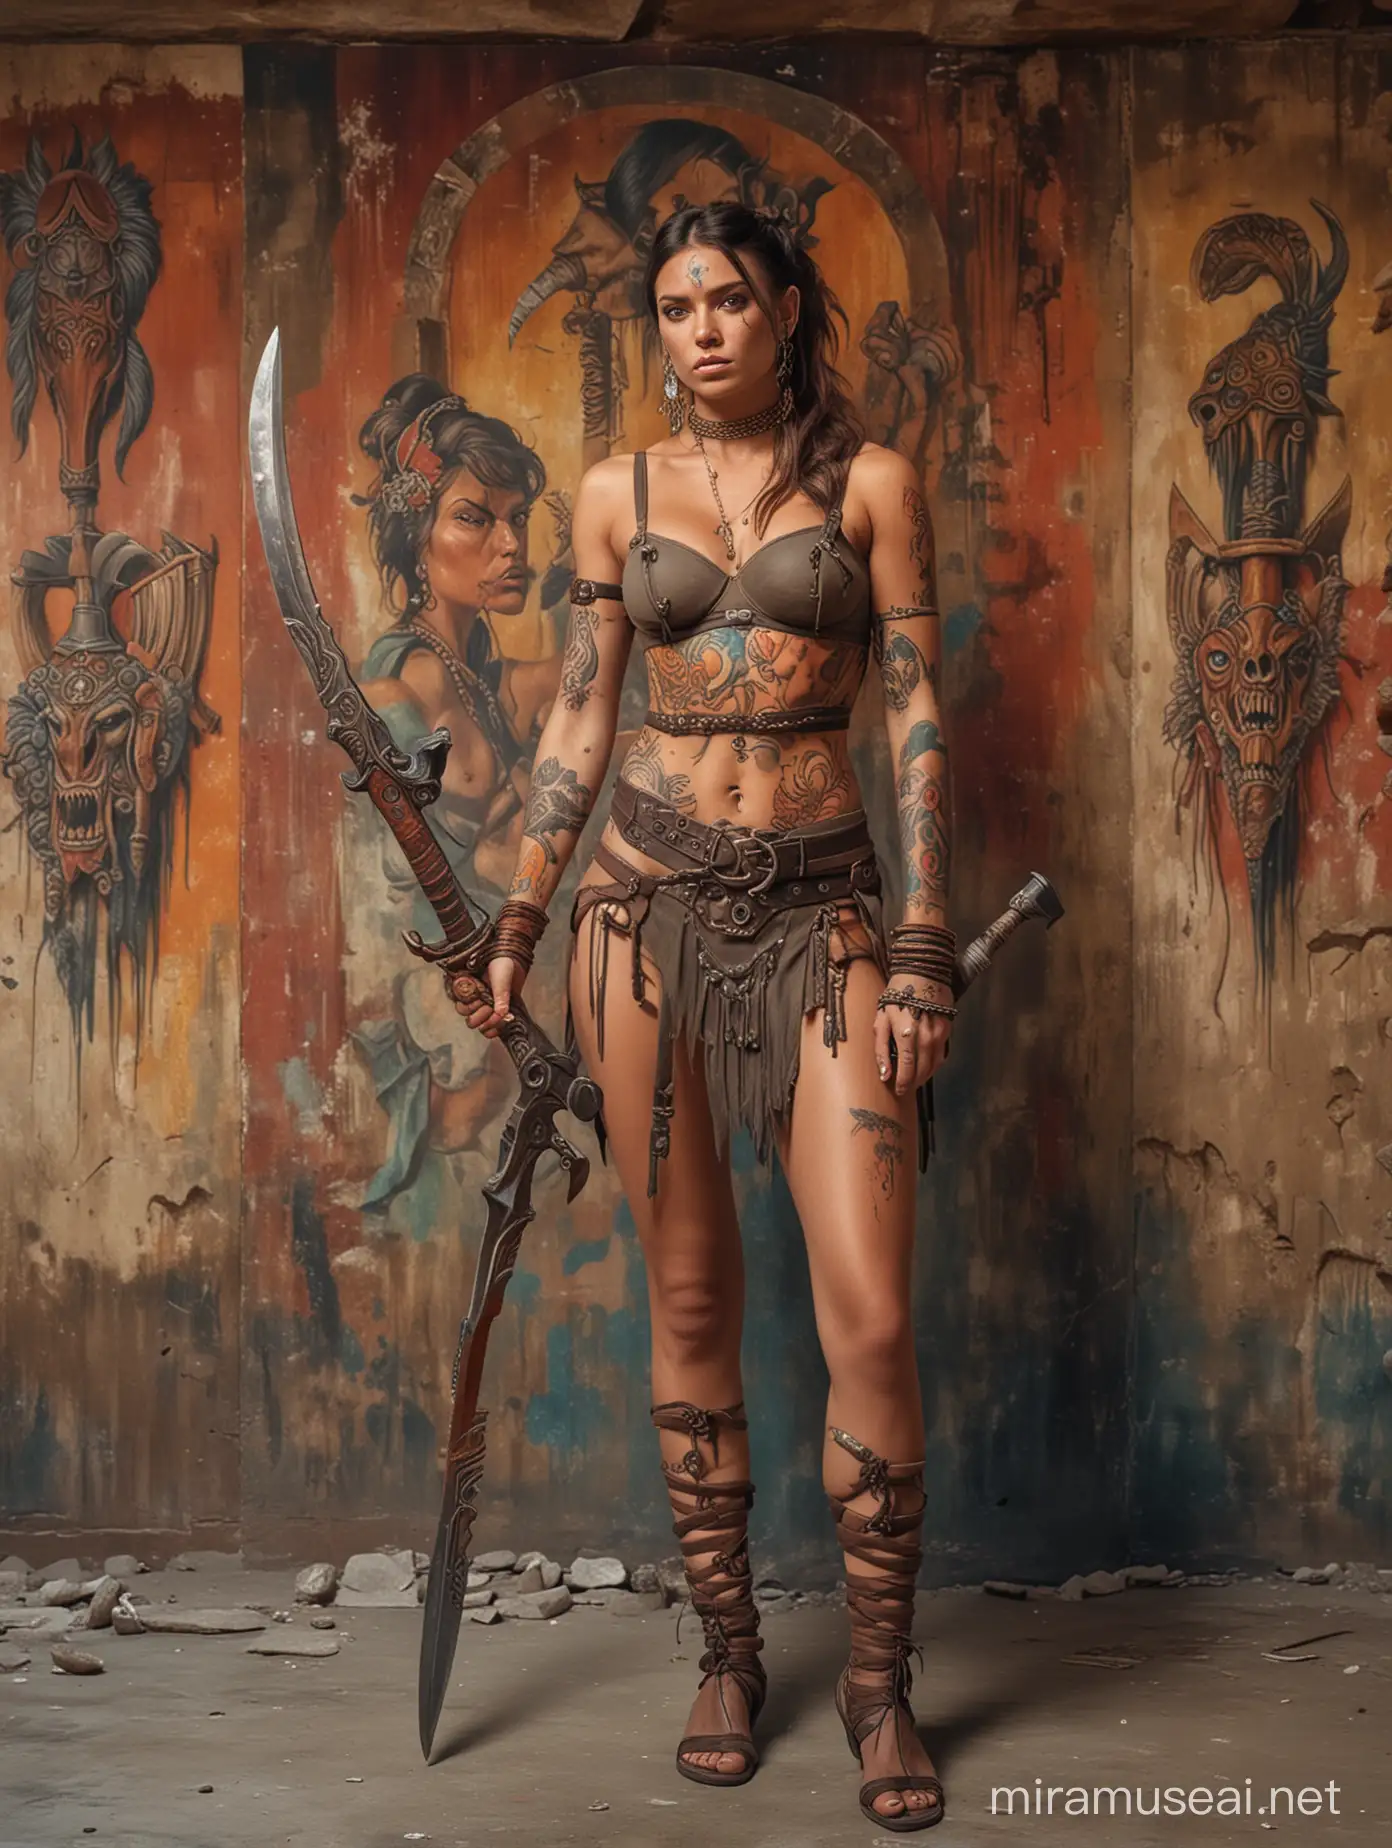 Barbaric Warrior Goddess with Tattoos in an Ancient Art Gallery